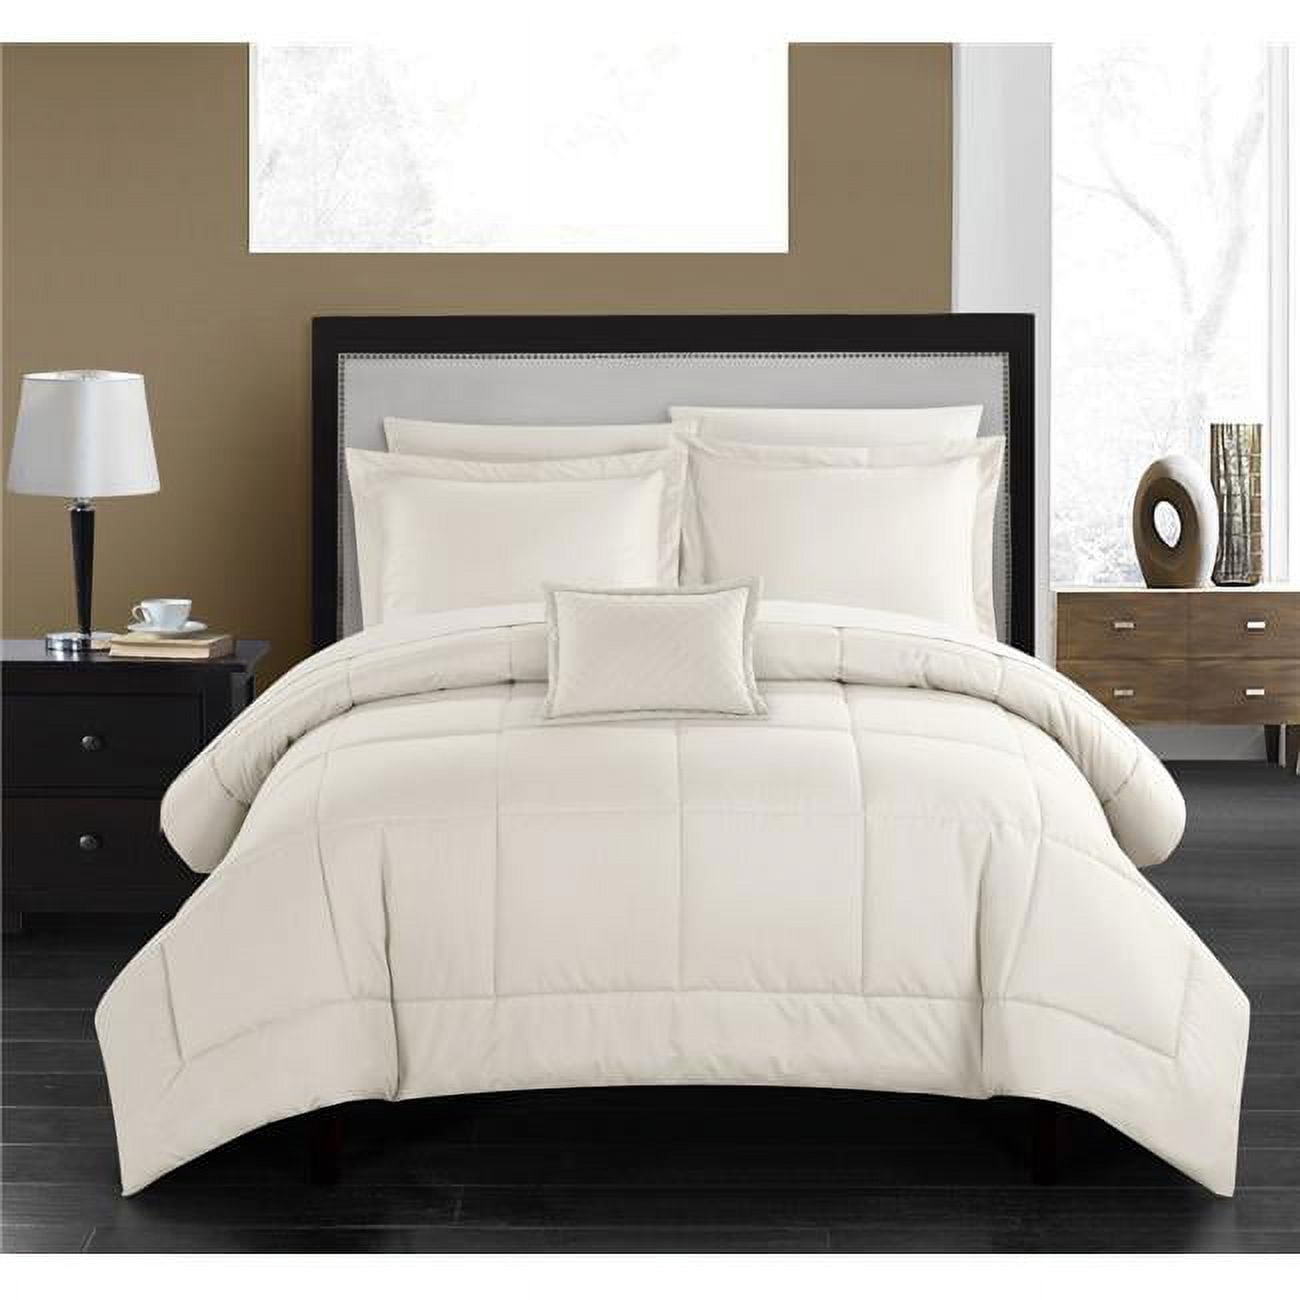 Bcs09104-us King Size Josaia Comforter Set With Solid Color Stitched Design & Decorative Pillow Shams Included, King, Beige - 8 Piece